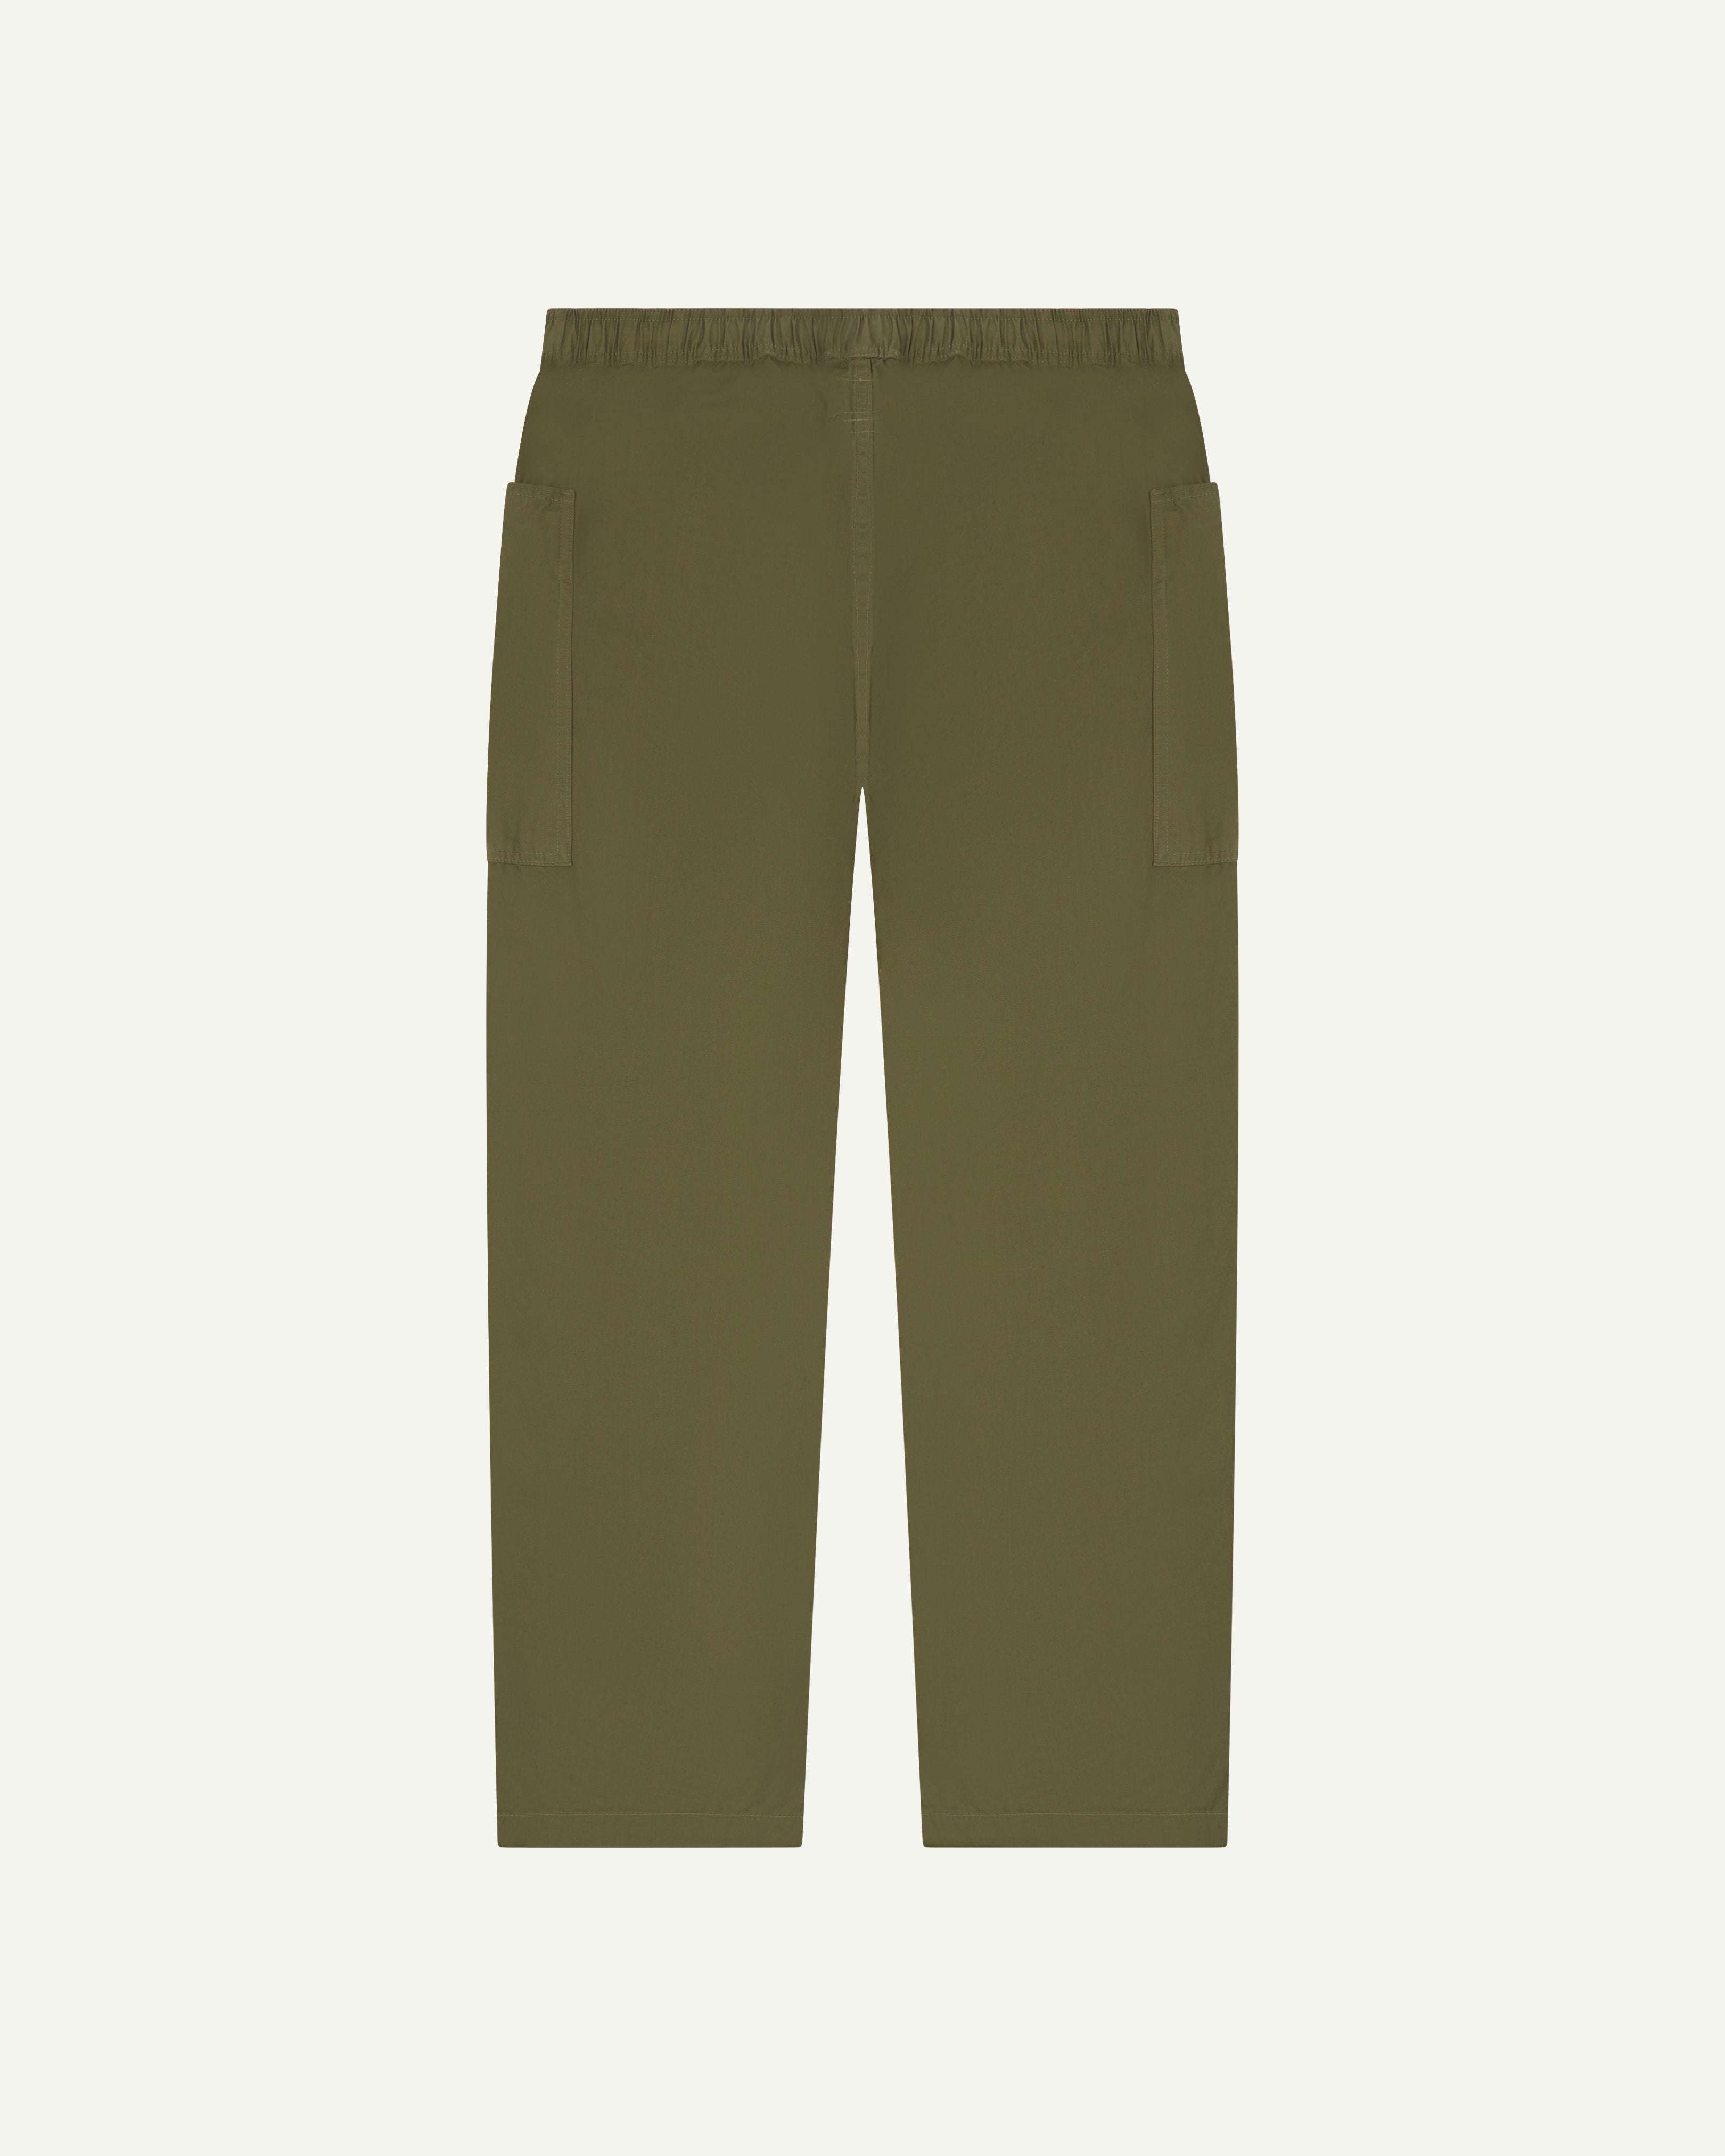 Full length back flat shot of olive green lightweight cotton 5011 trousers showing the relaxed, tapered fit on the leg.